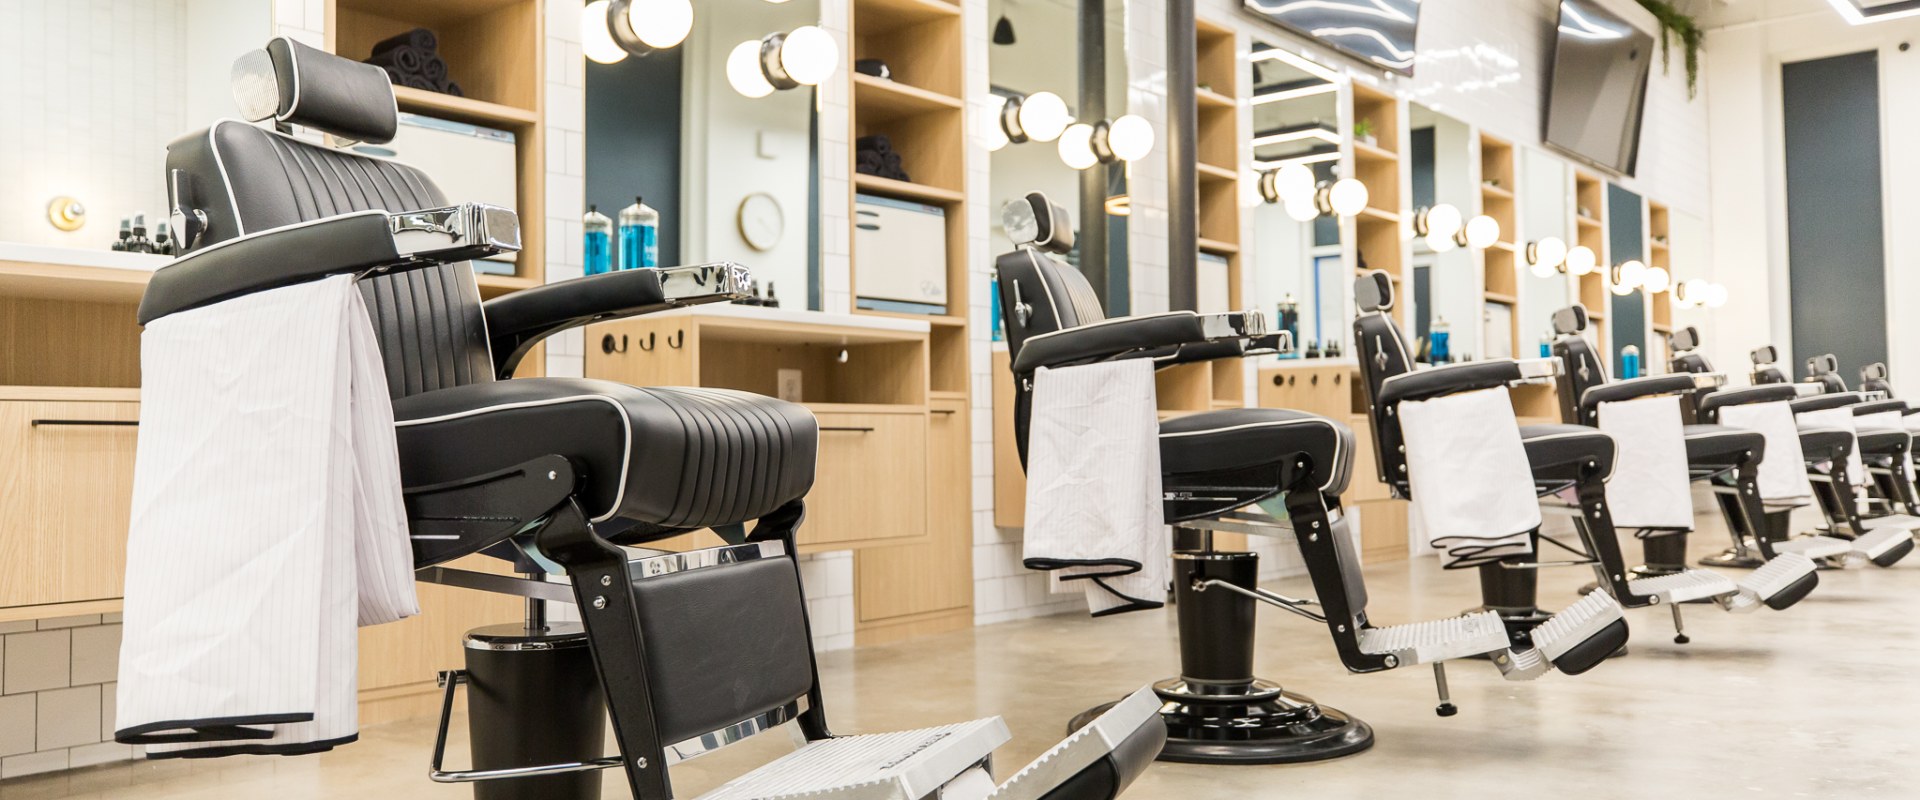 Experience the Best Hair Care in Washington DC